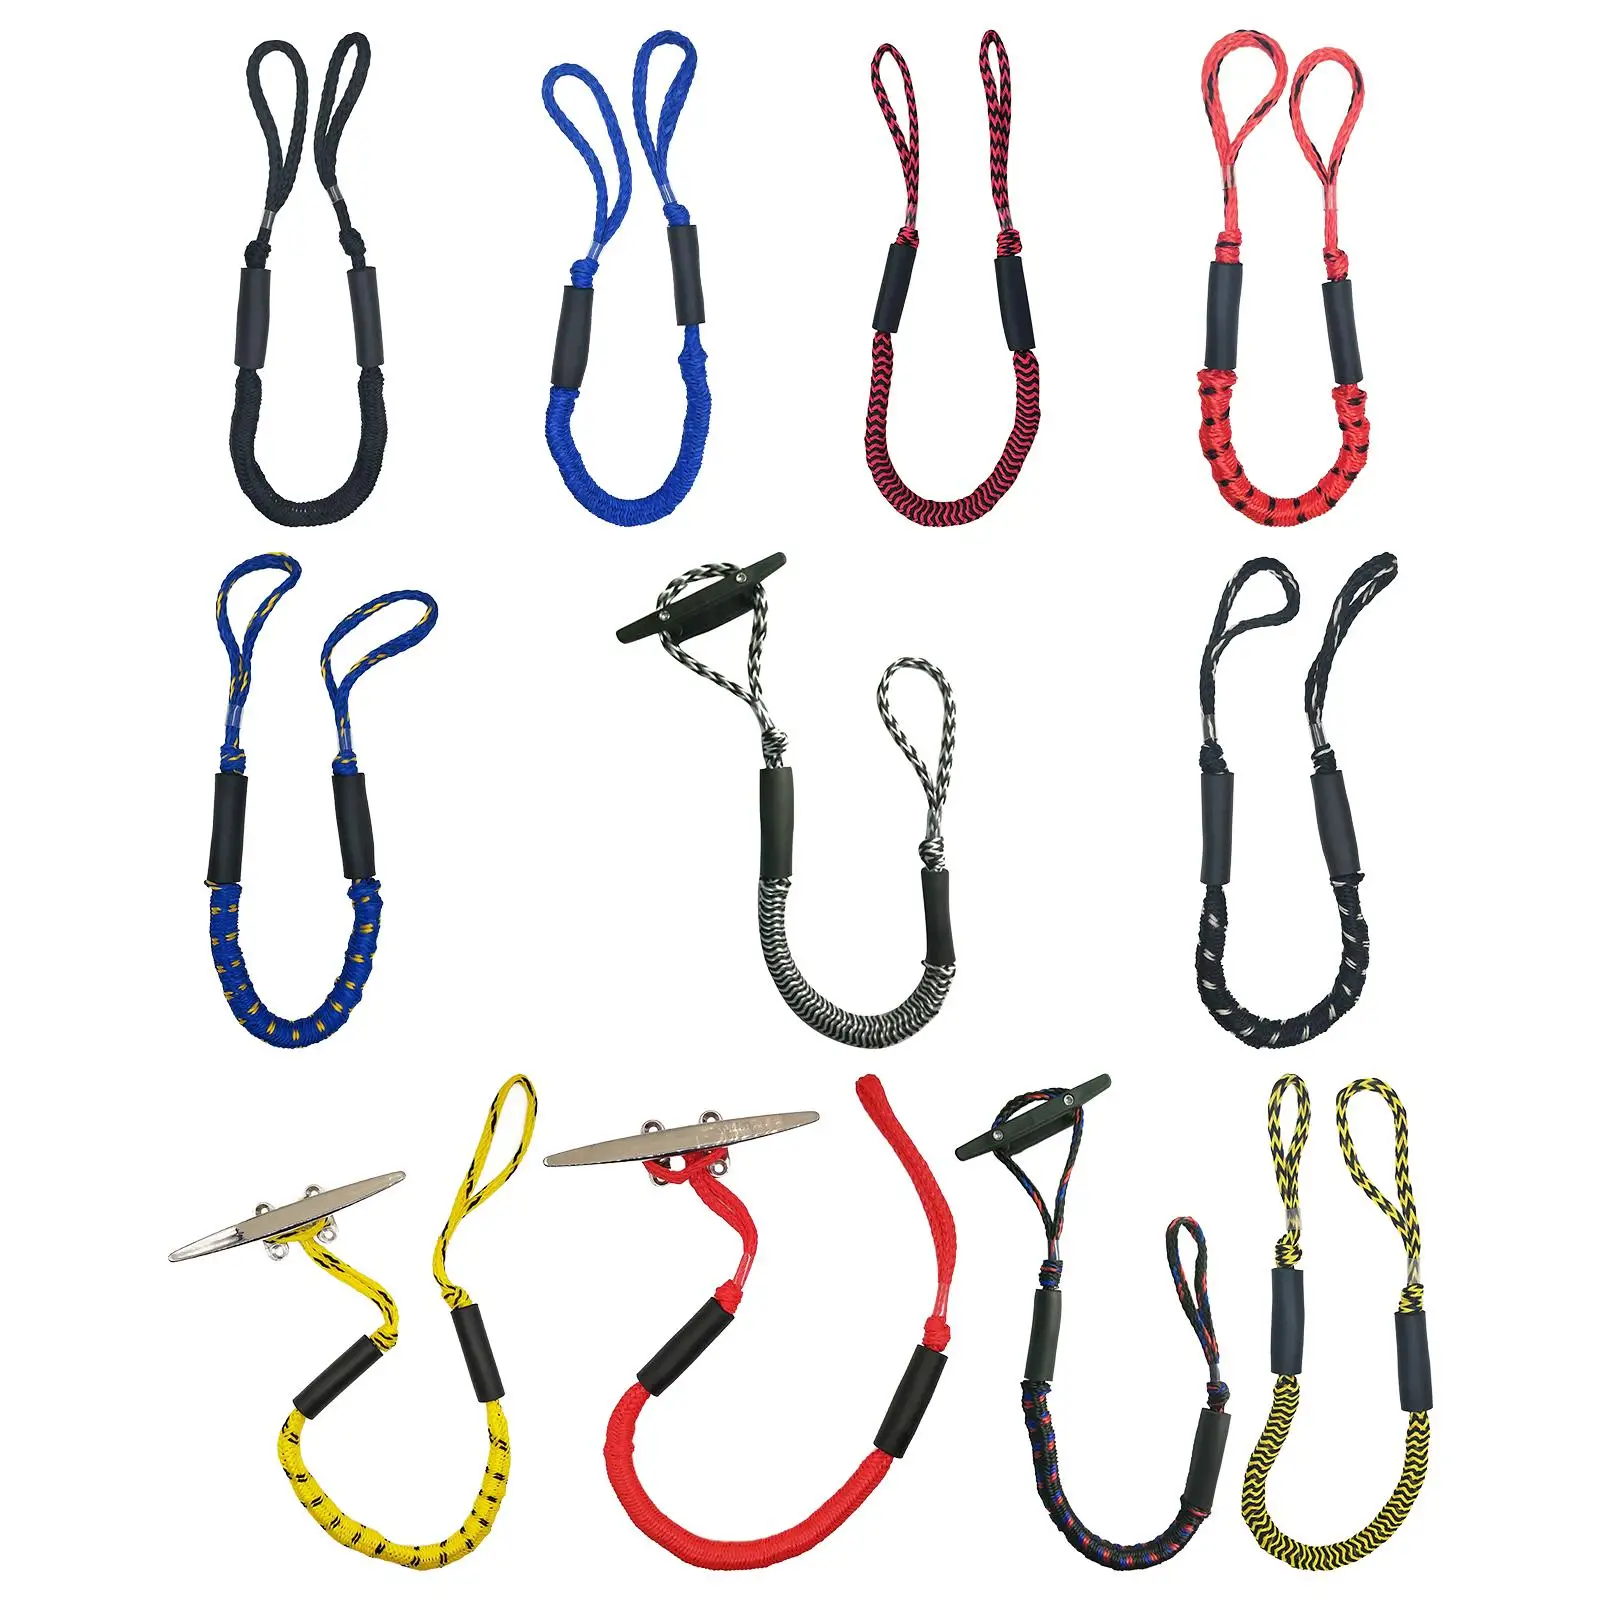 4 Feet Boat  & Stretchable Mooring Rope Dock Ties  Cords for Boat